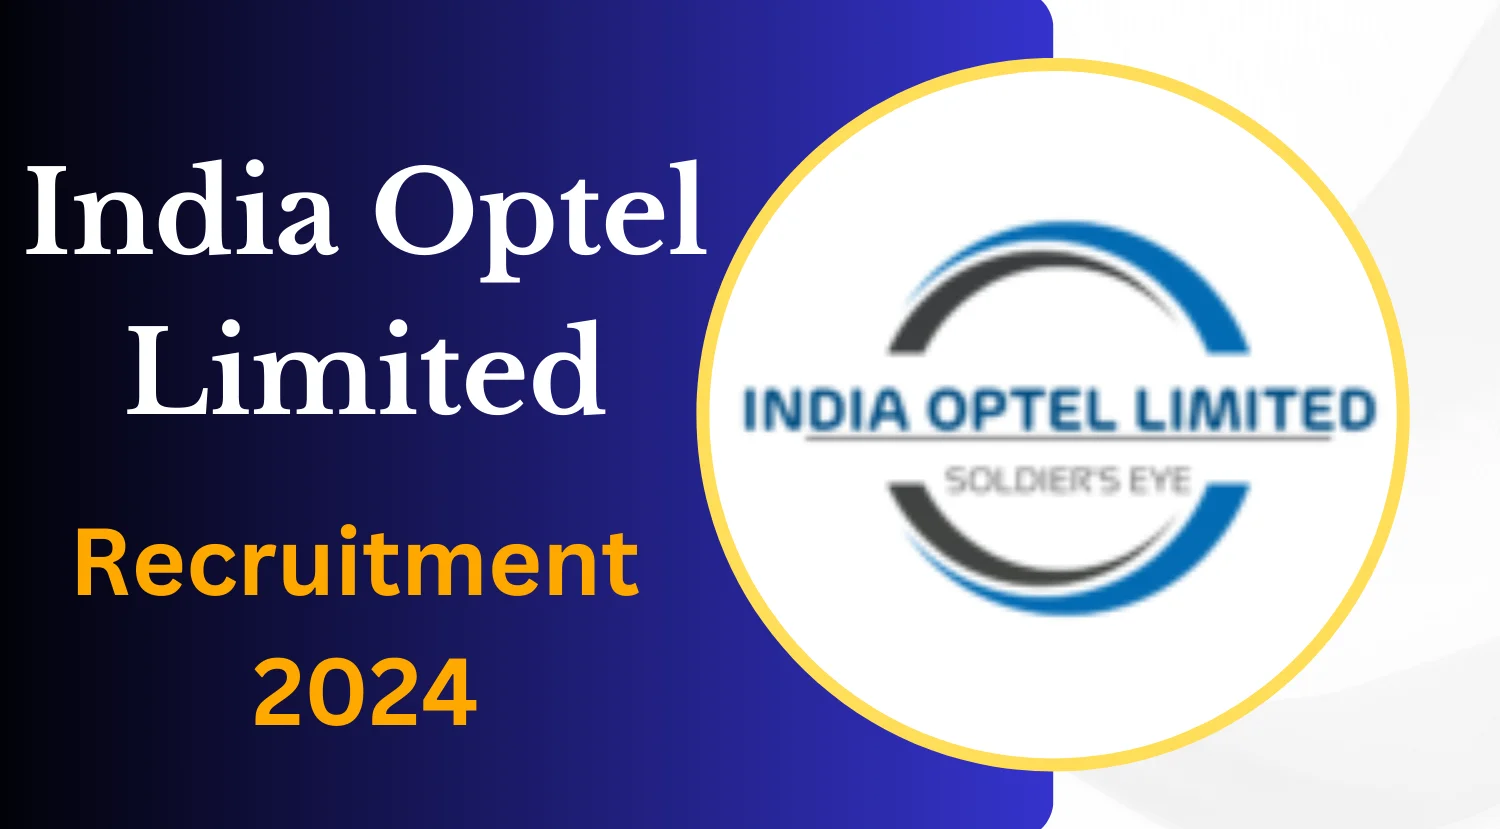 India Optel Limited Recruitment 2024